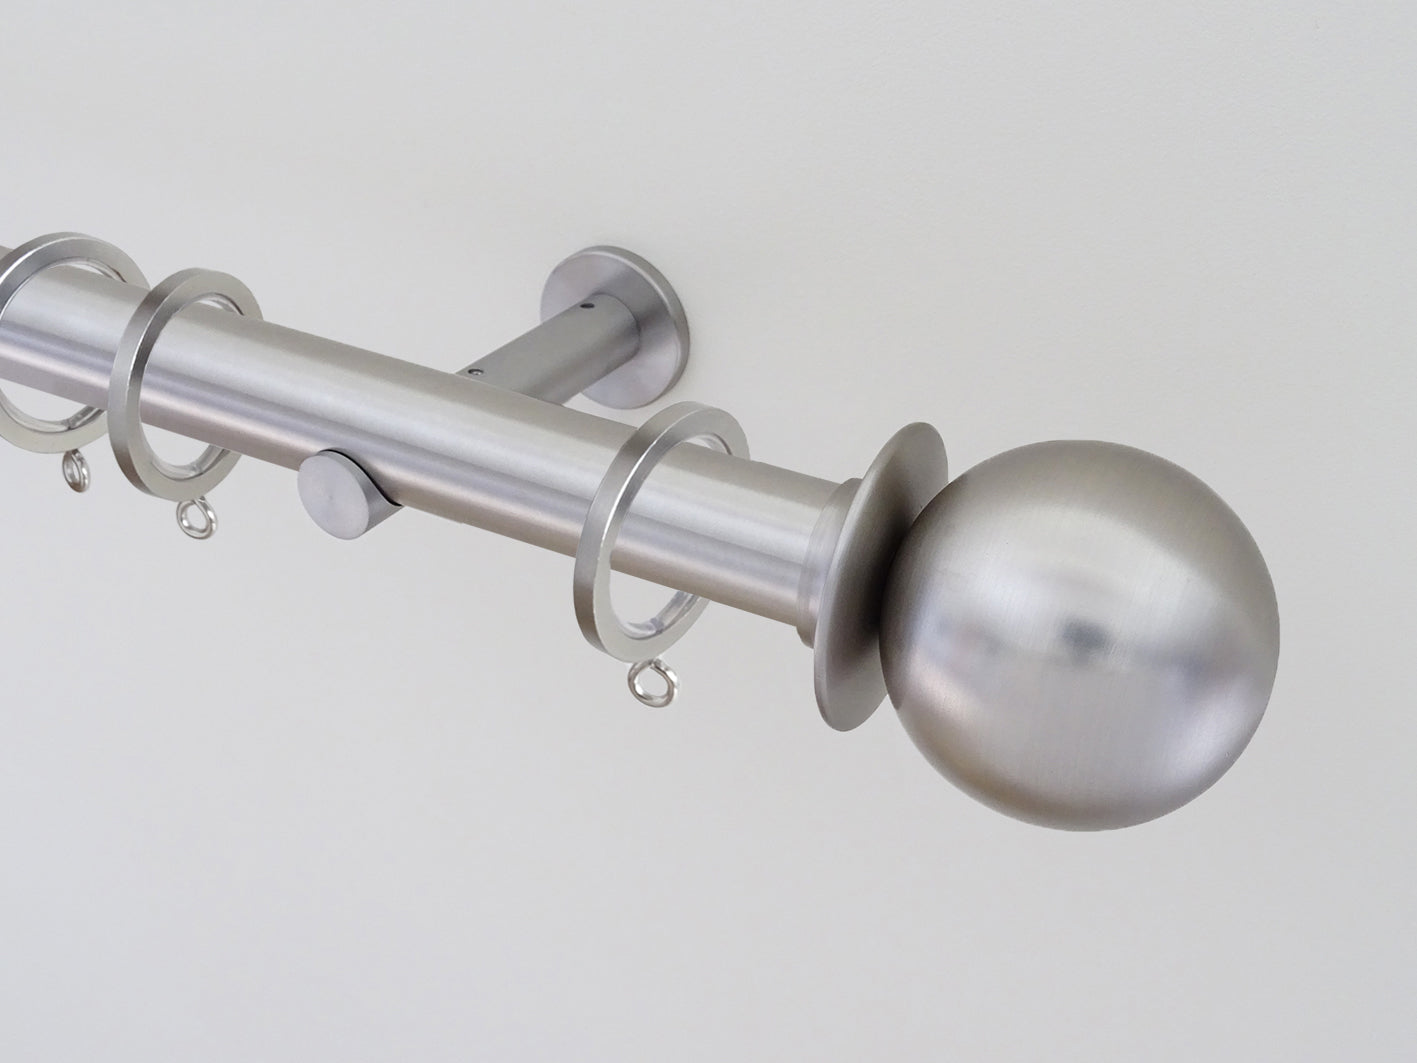 30mm diameter stainless steel curtain pole collection with Steel Ball finials